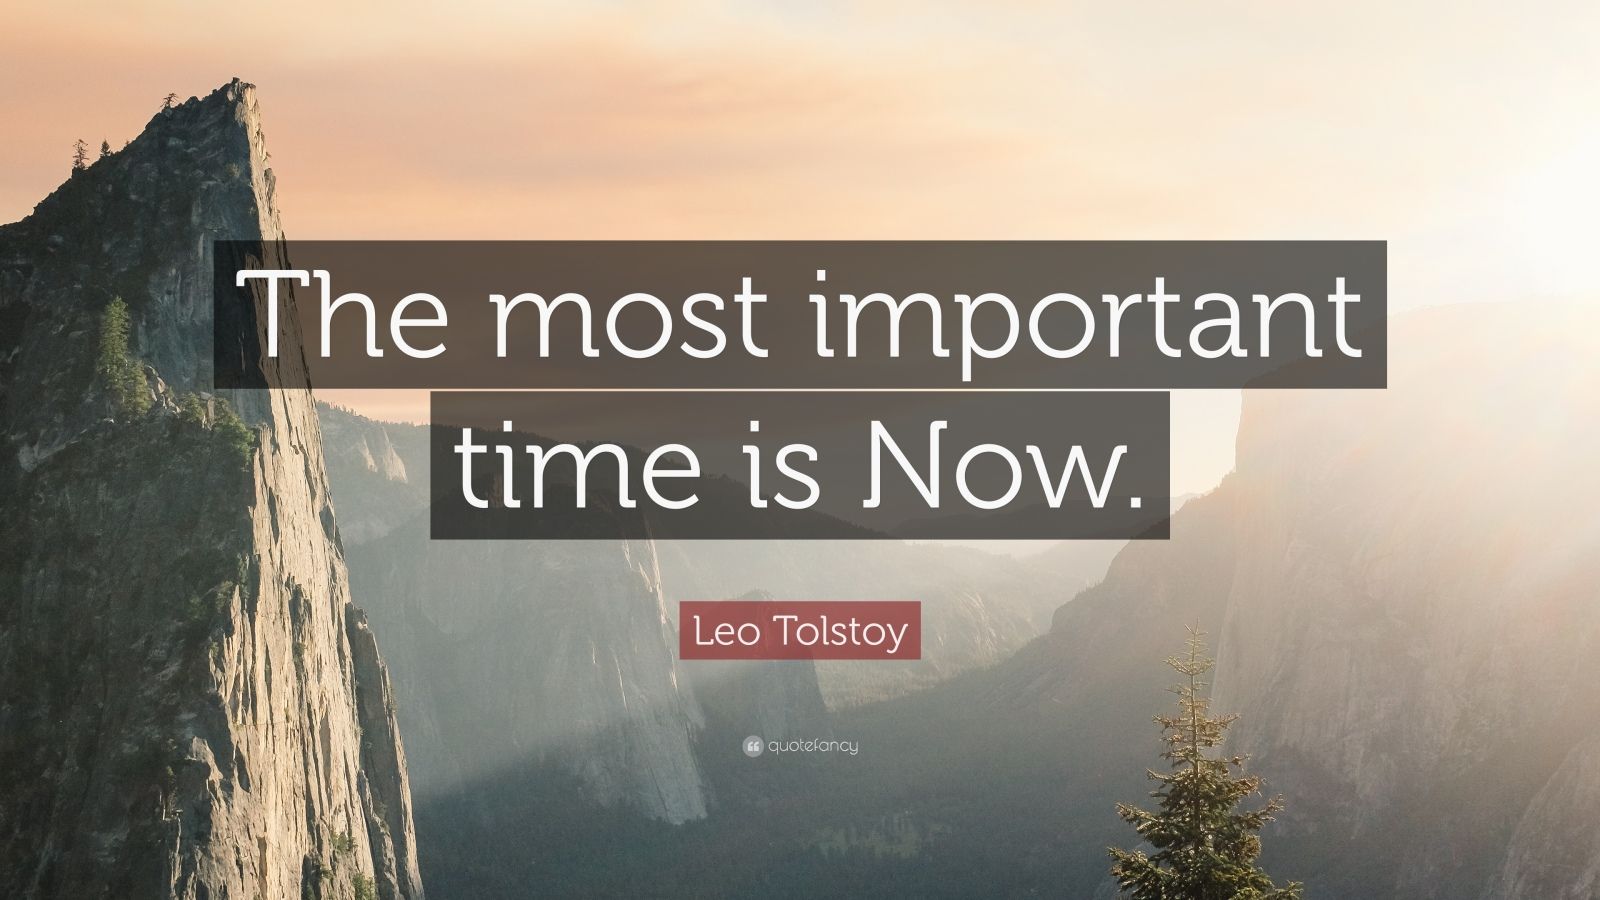 Leo Tolstoy Quote “The most important time is Now.”